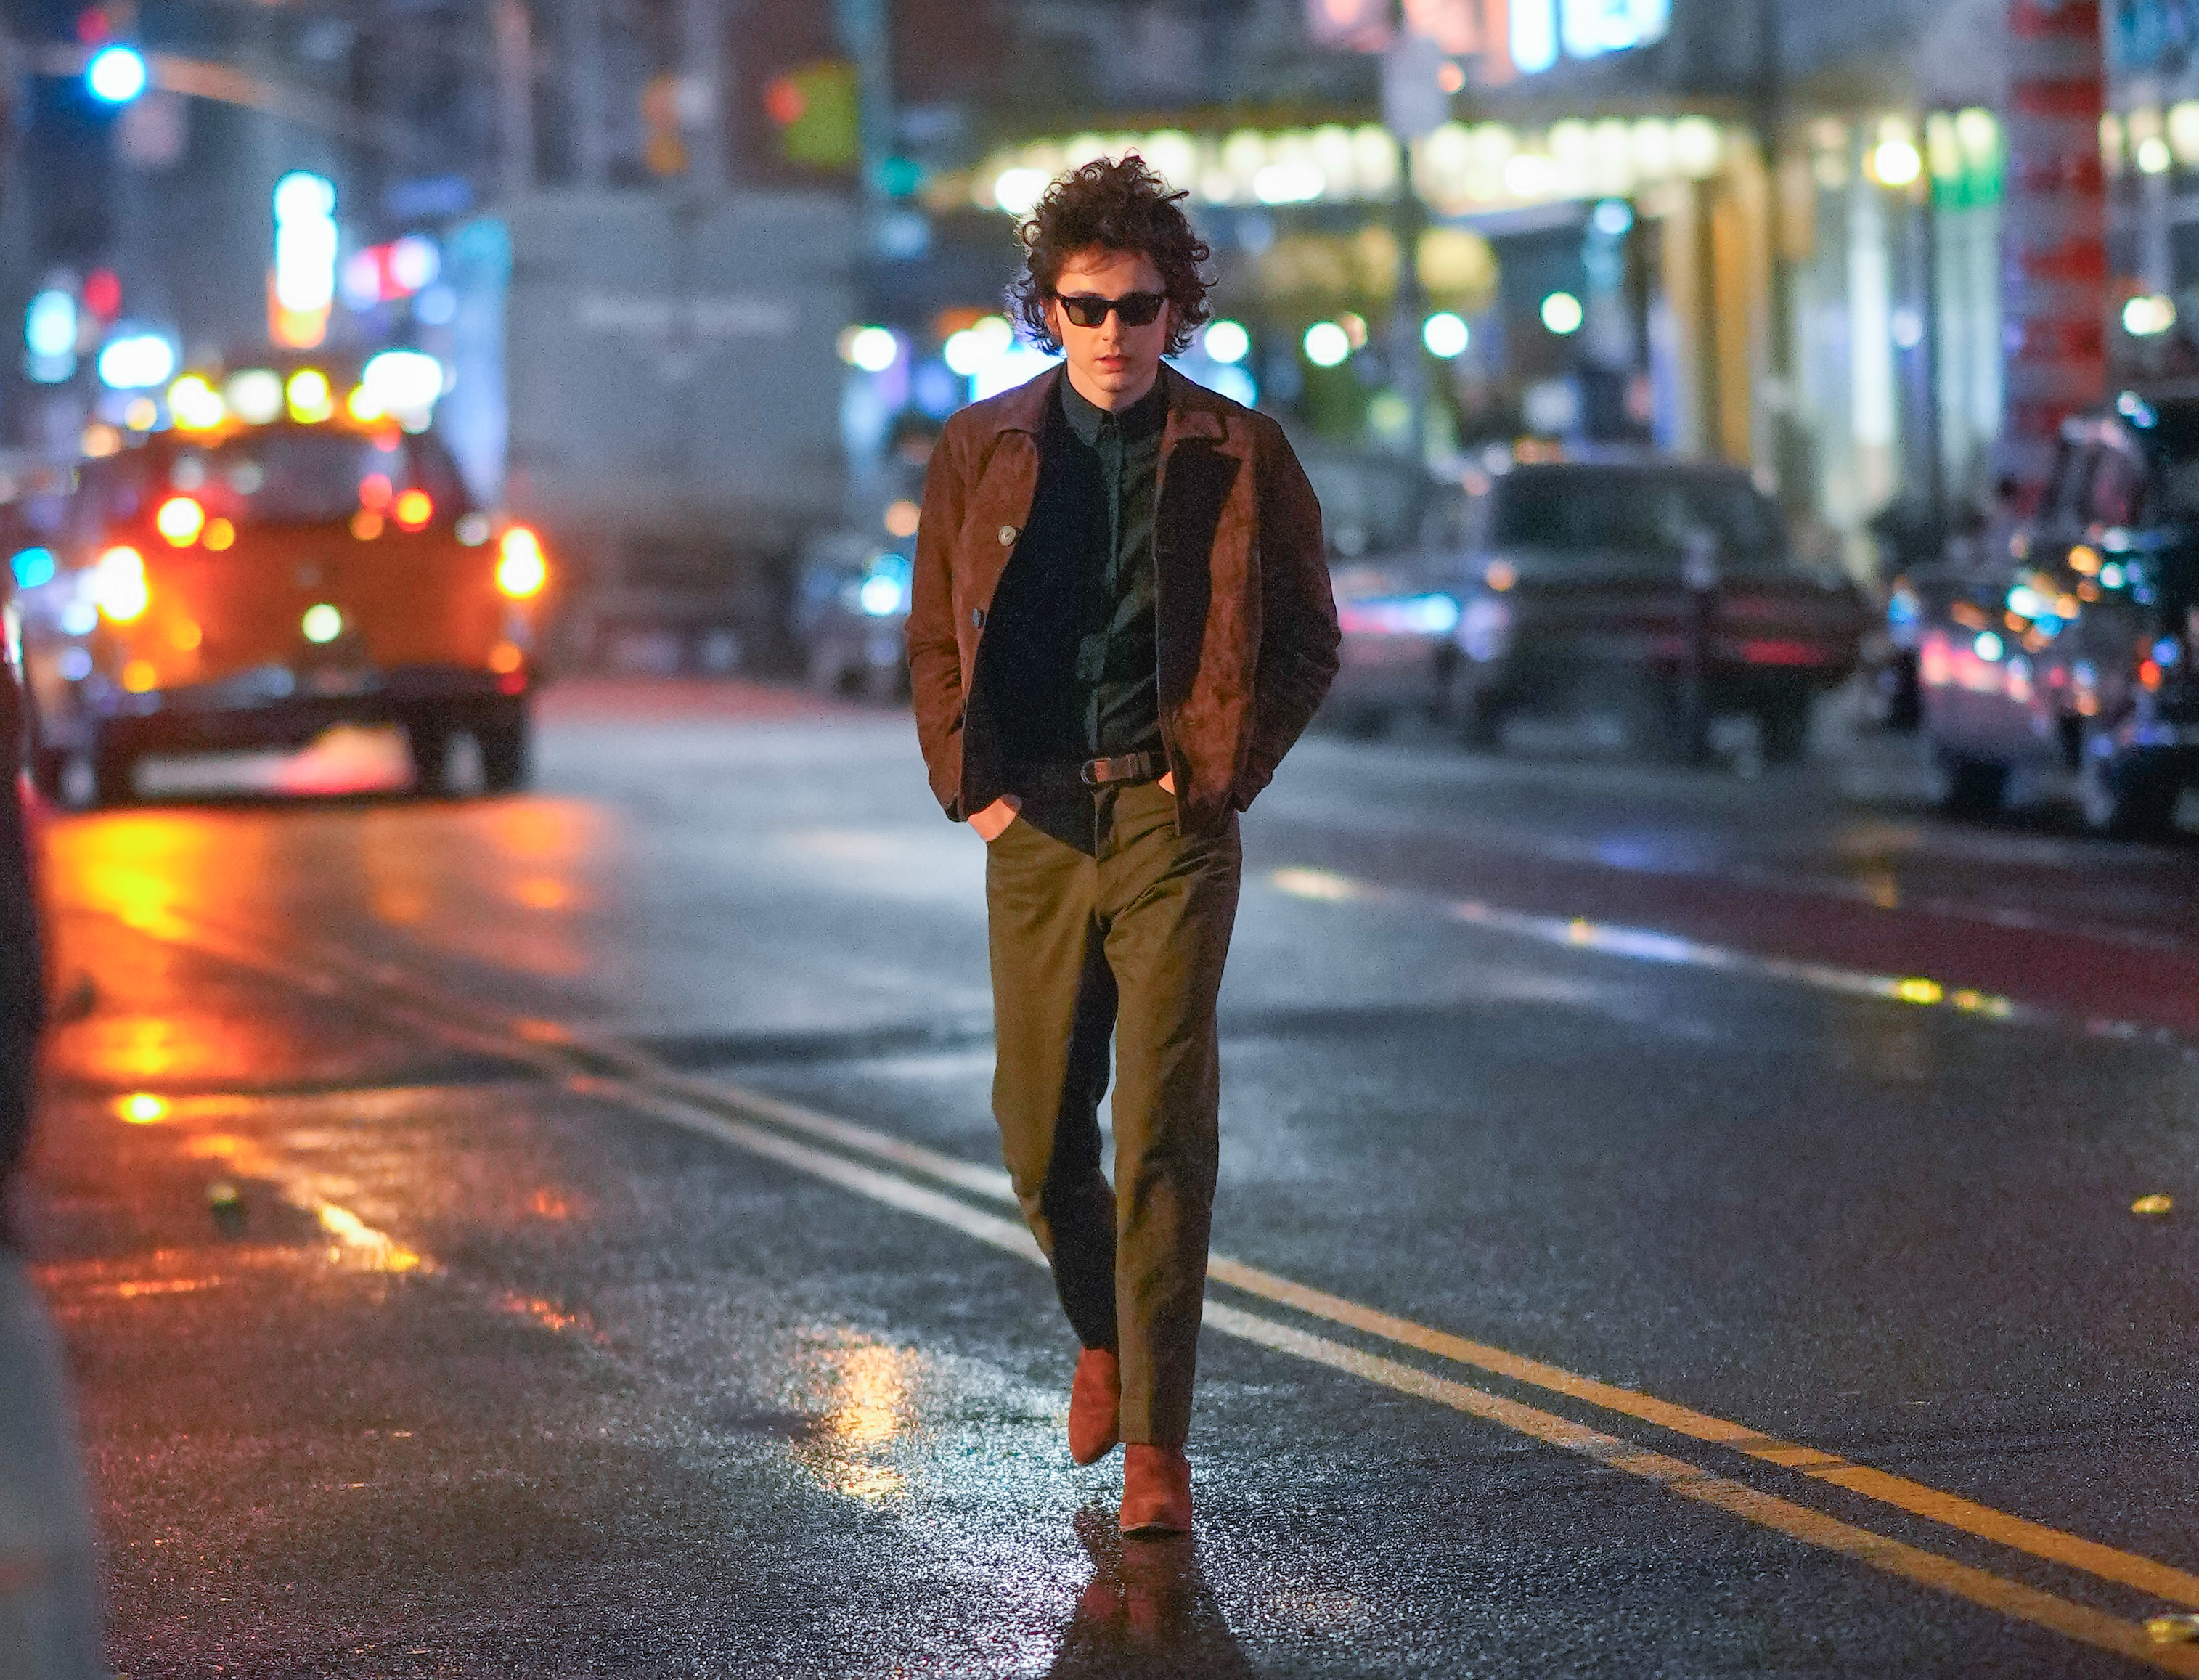 Timmy in jacket and sunglasses walking confidently on urban street at night